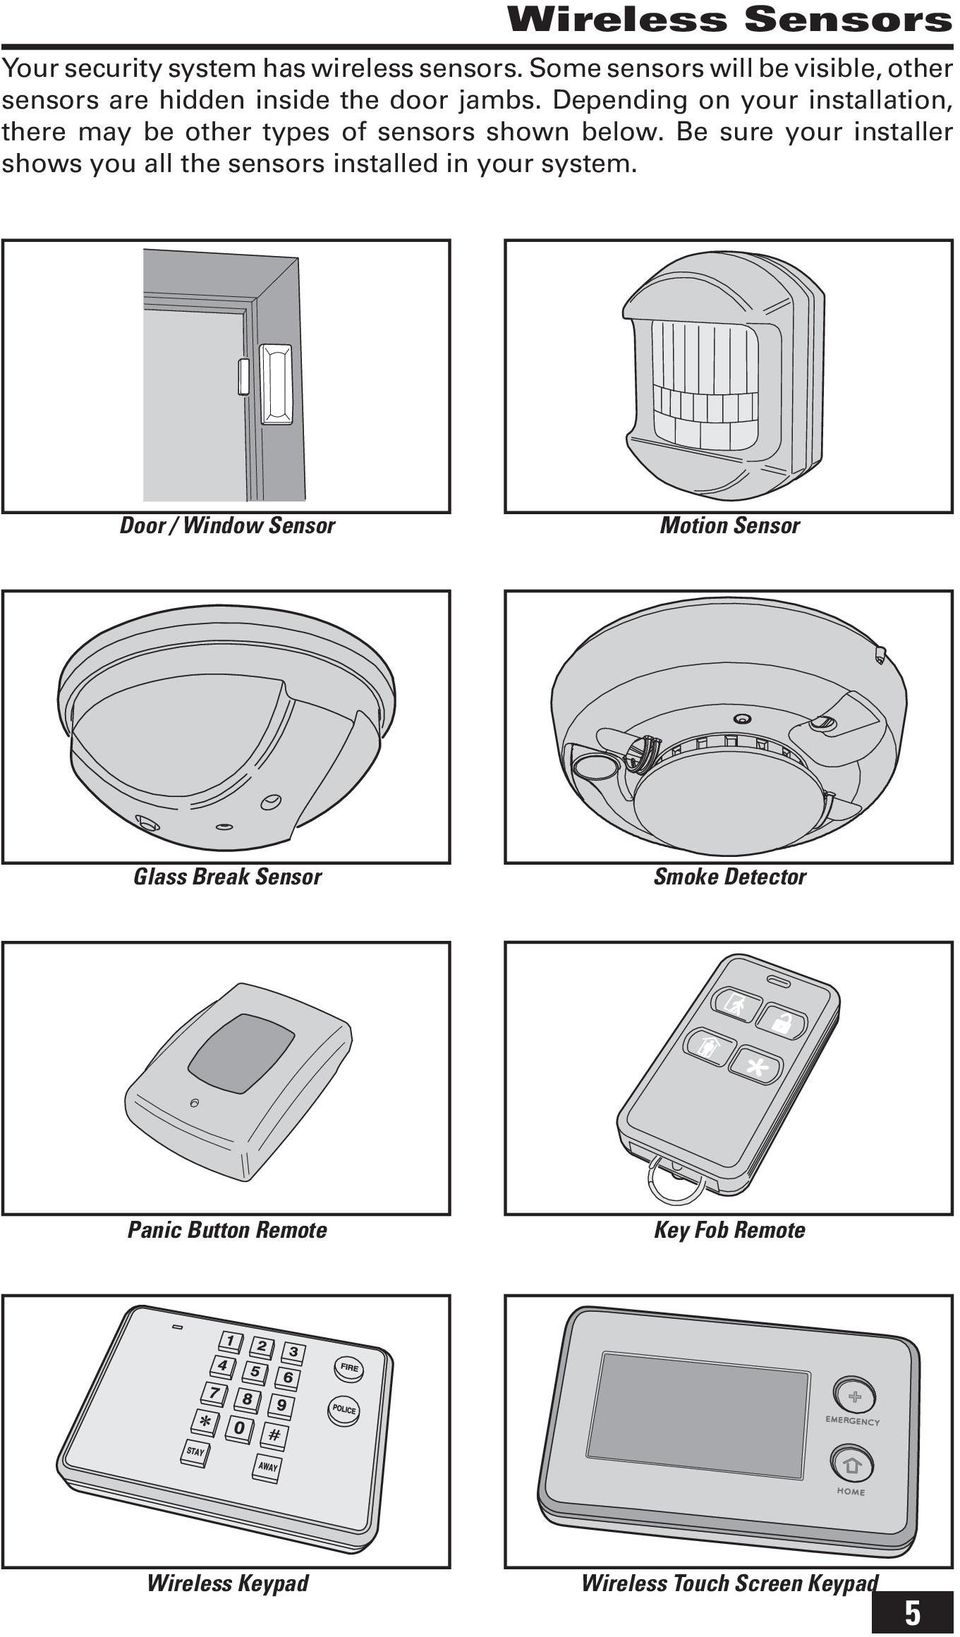 Depending on your installation, there may be other types of sensors shown below.